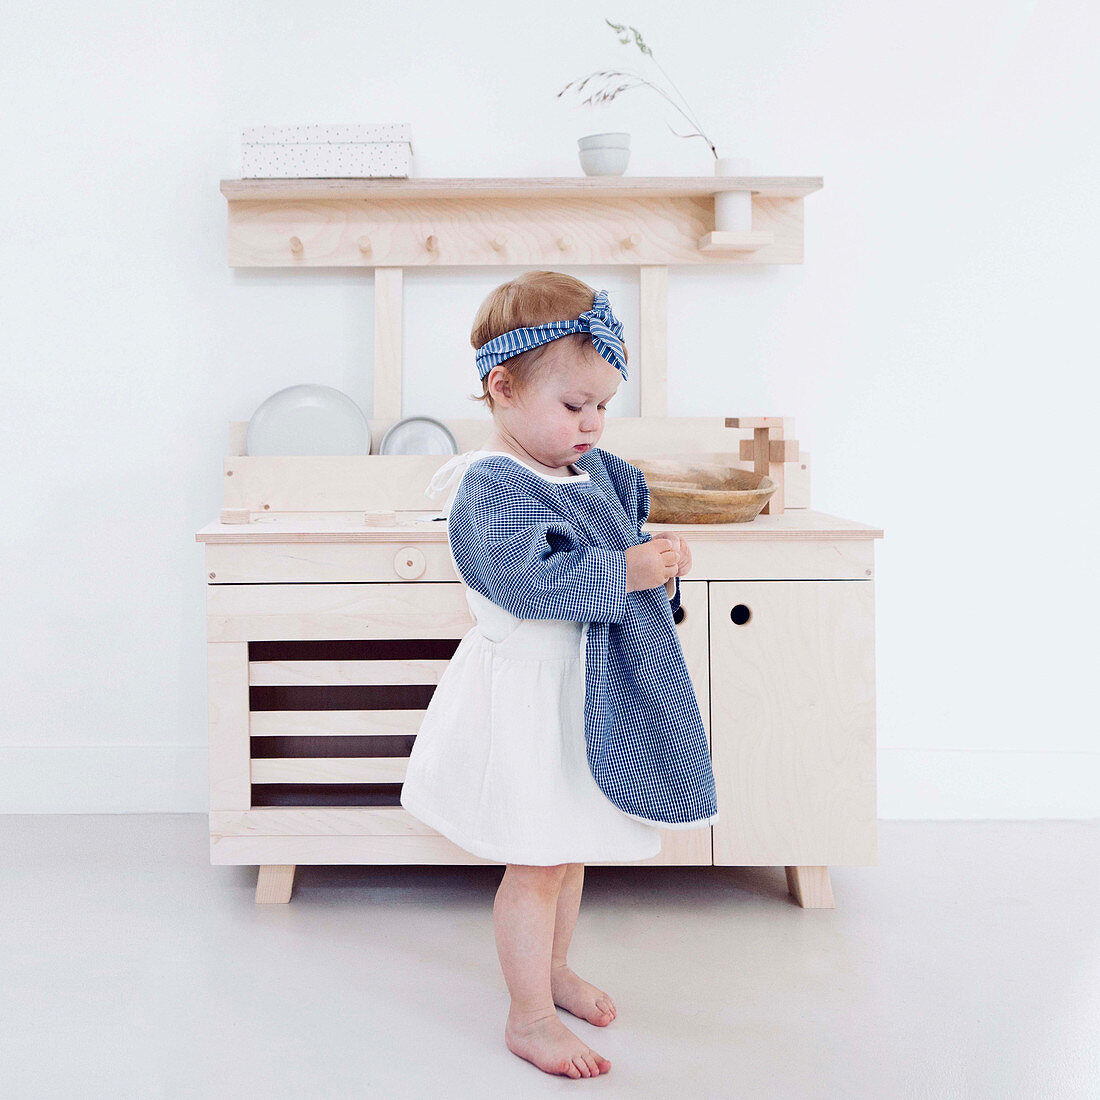 Little girl standing in front of pale wooden play kitchen